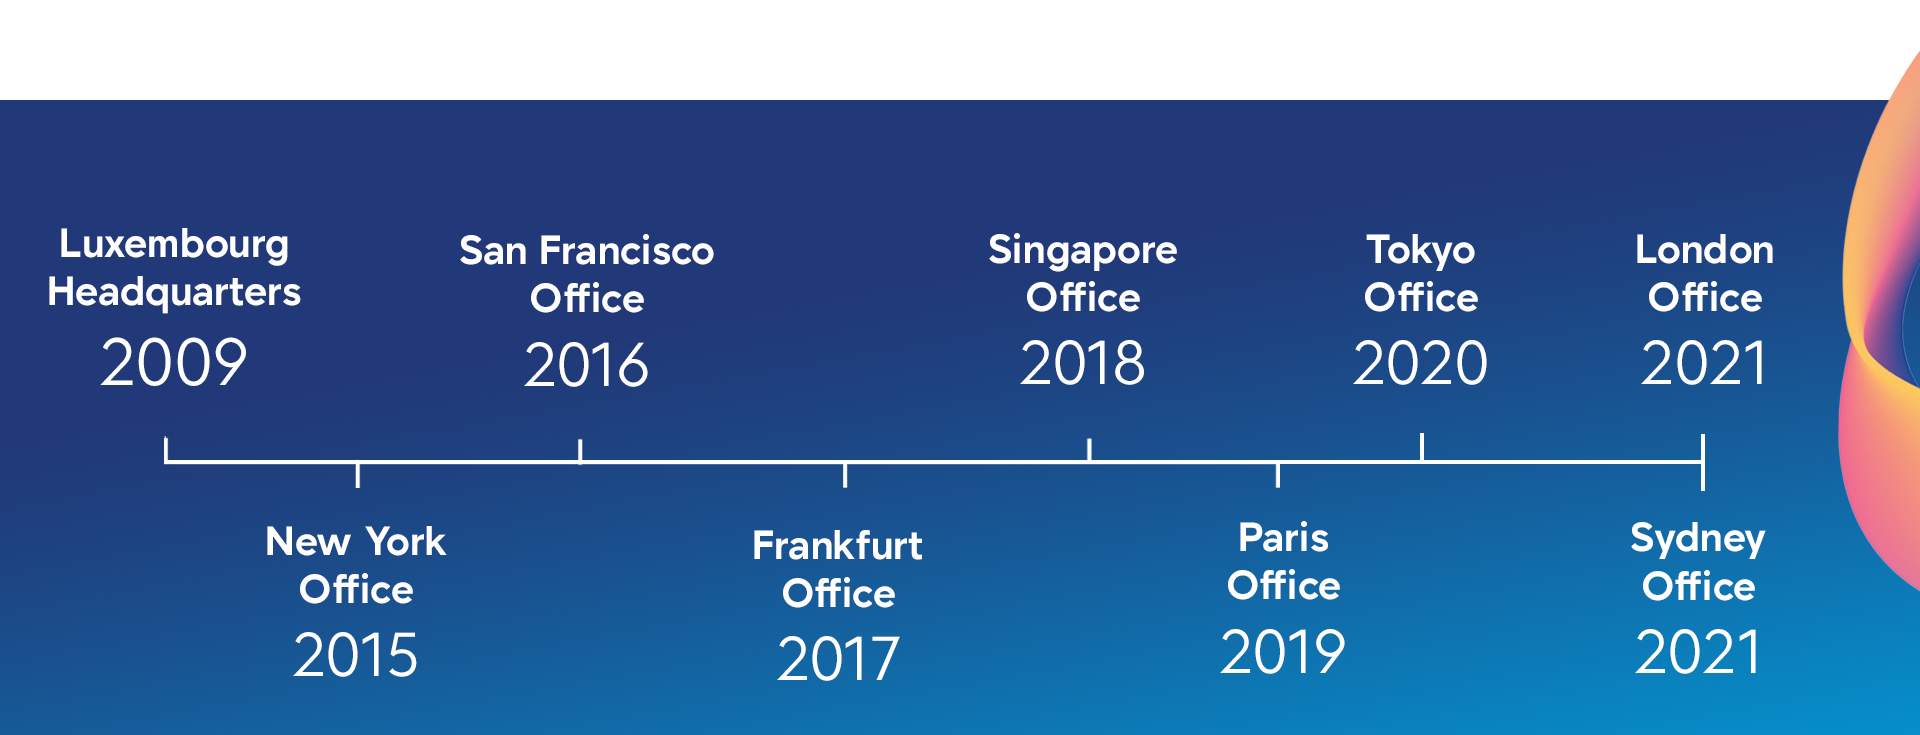 Dates at which Talkwalker opened its different offices around the globe (Luxembourg:2009, New York: 2015, Frankfurt: 2017, Singapore: 2018, Paris: 2019, London:2021, Sydney: 2021)